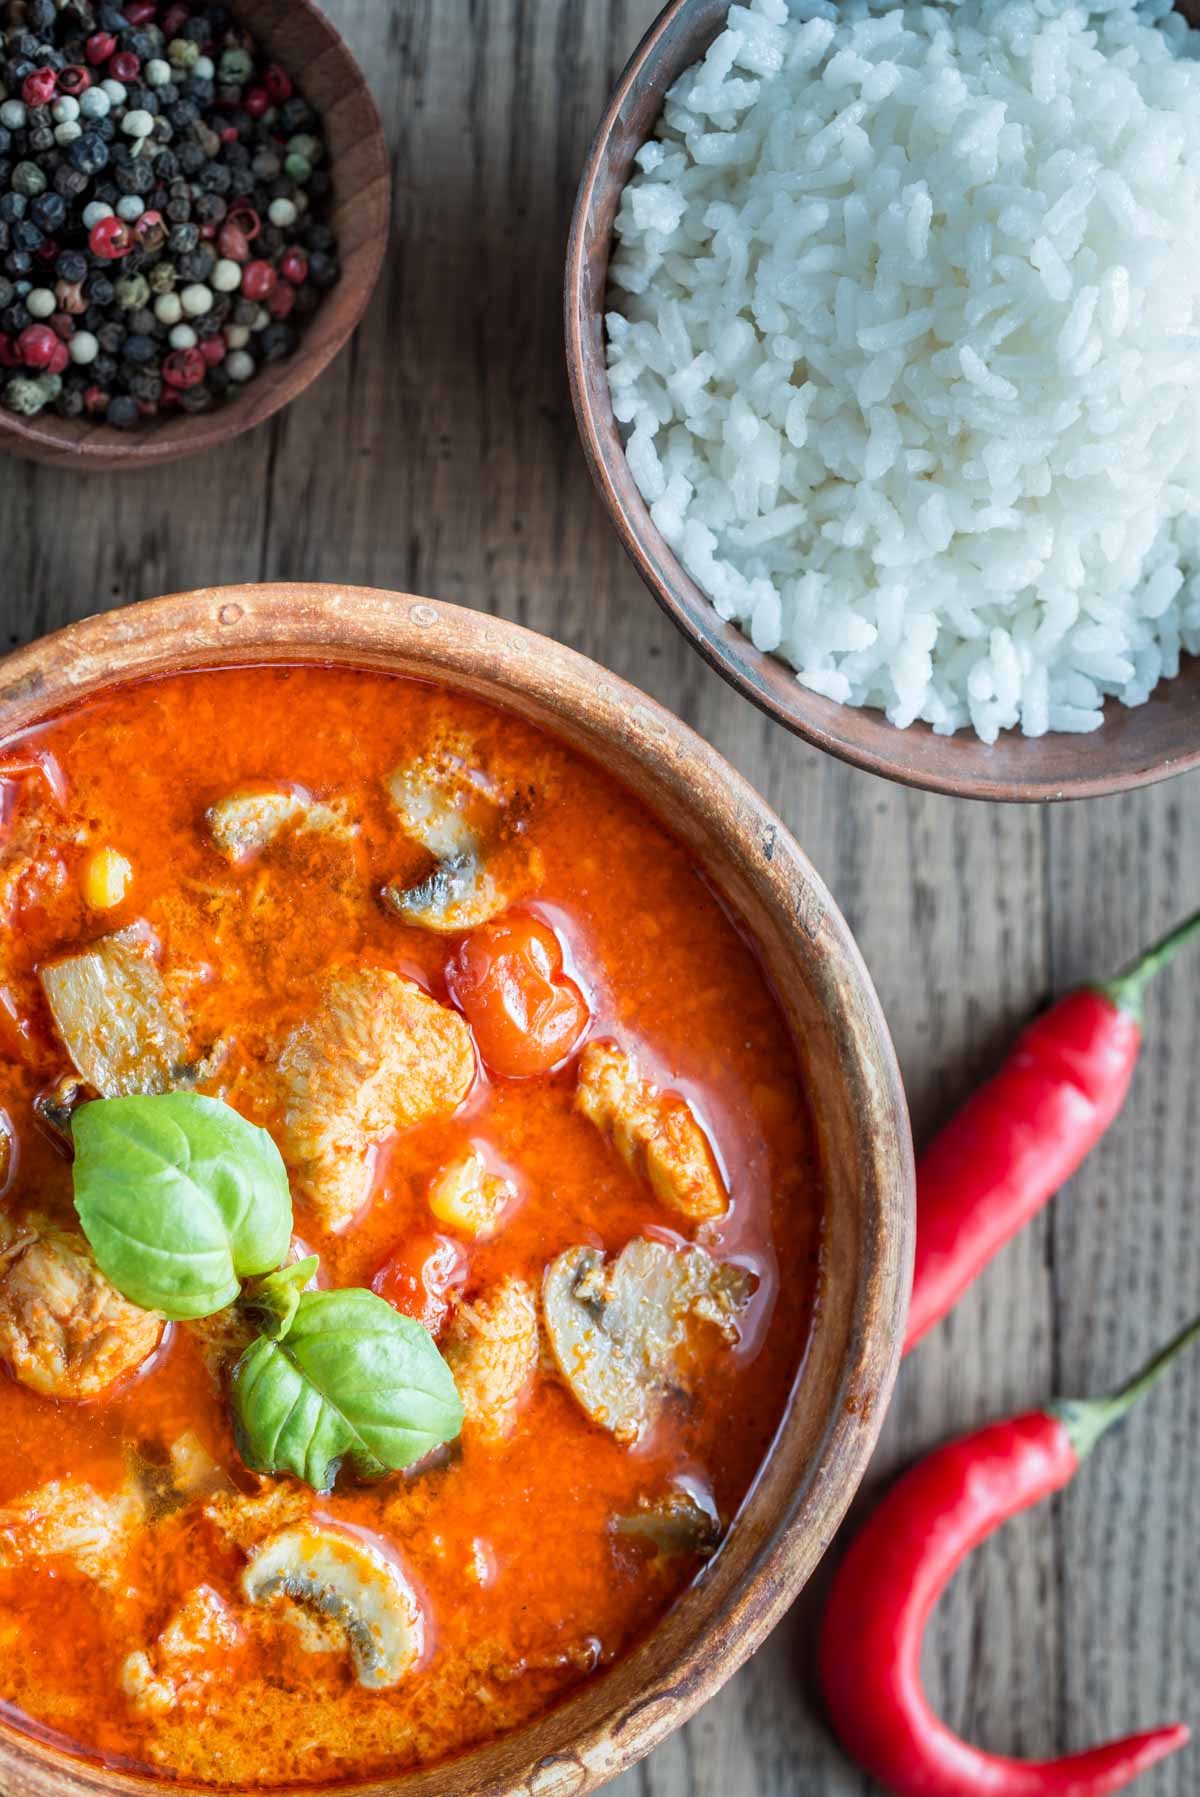 Rich red curry, vibrant in colour, garnished with basil and served with rice